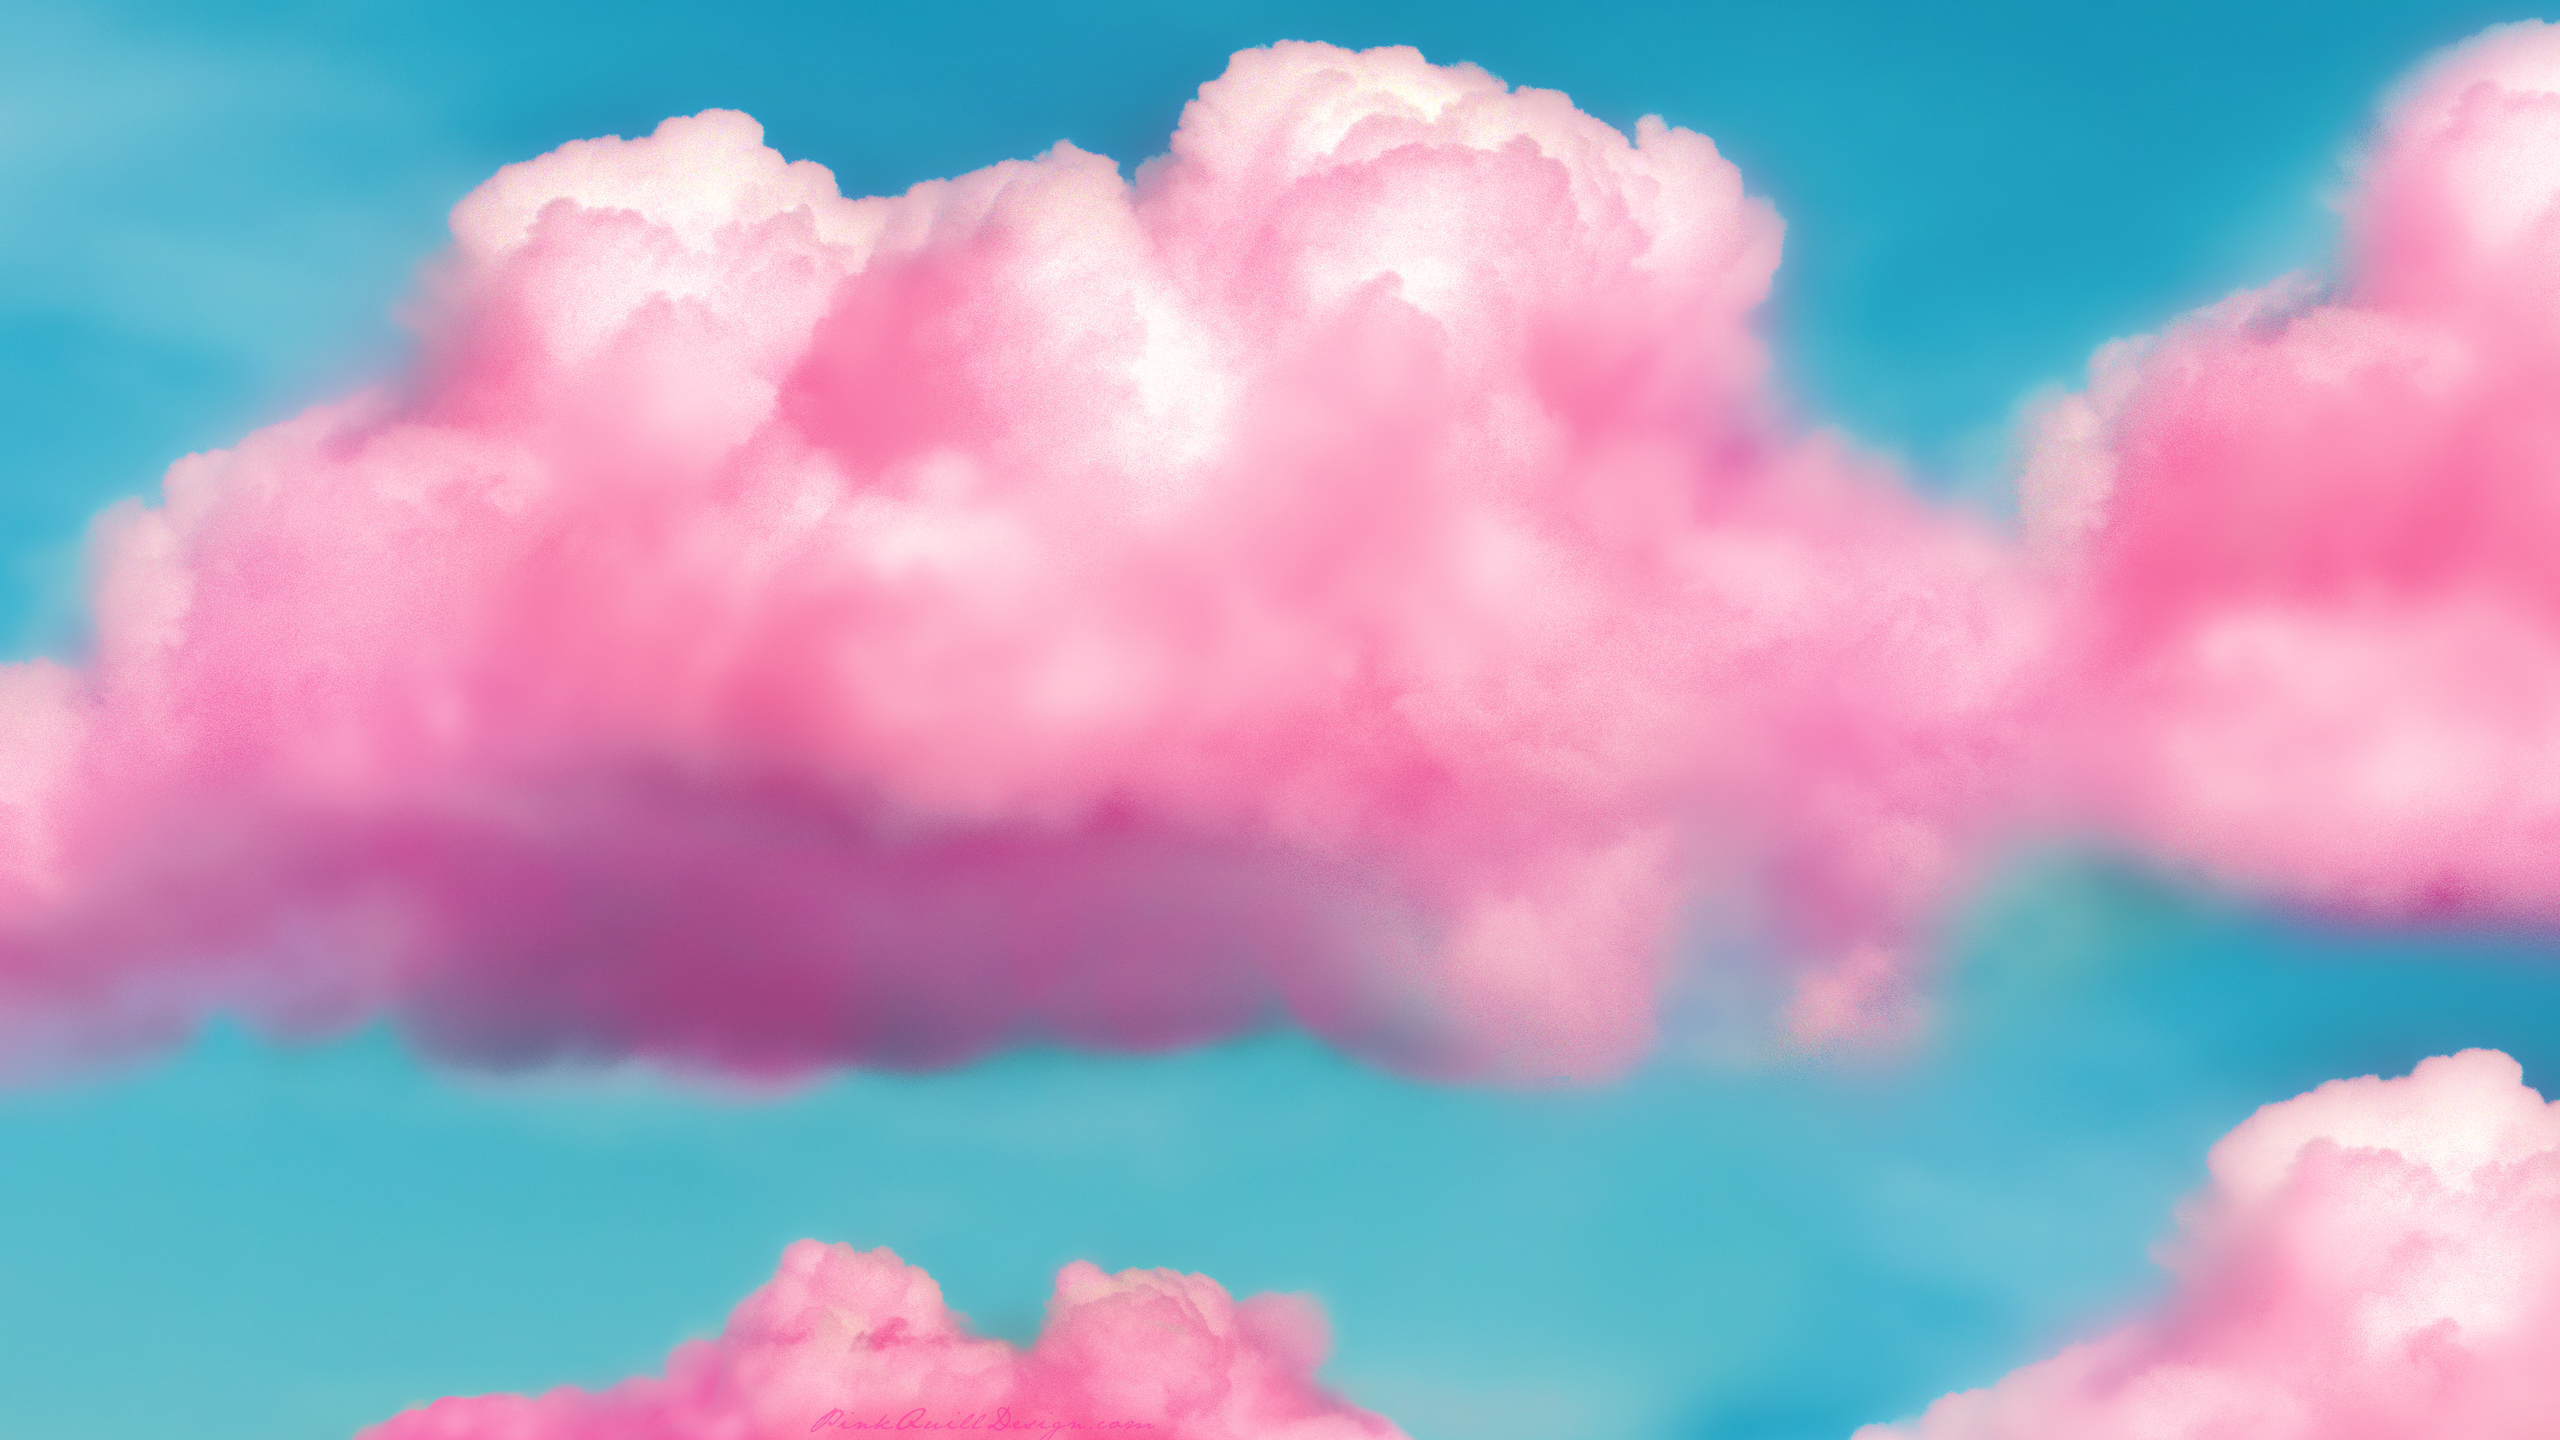 Pink Fluffy Clouds HD Wallpaper by pinkquilldesign 2560x1440